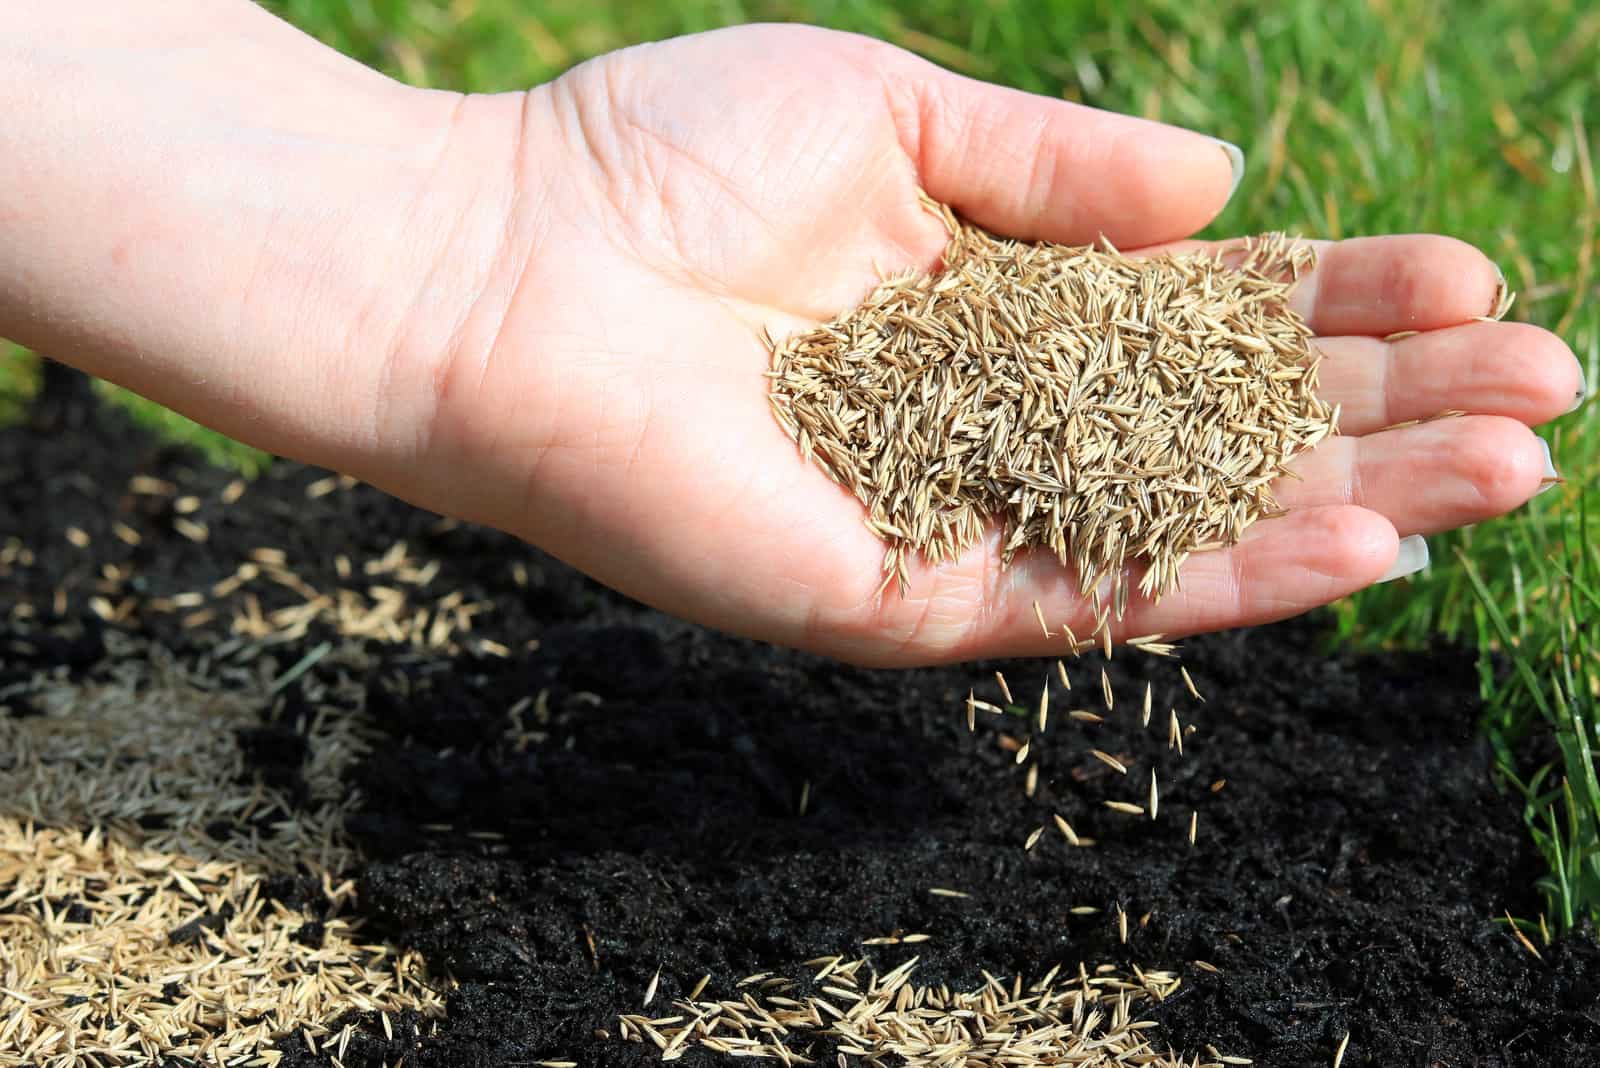 hand spreading grass seeds on soil patch